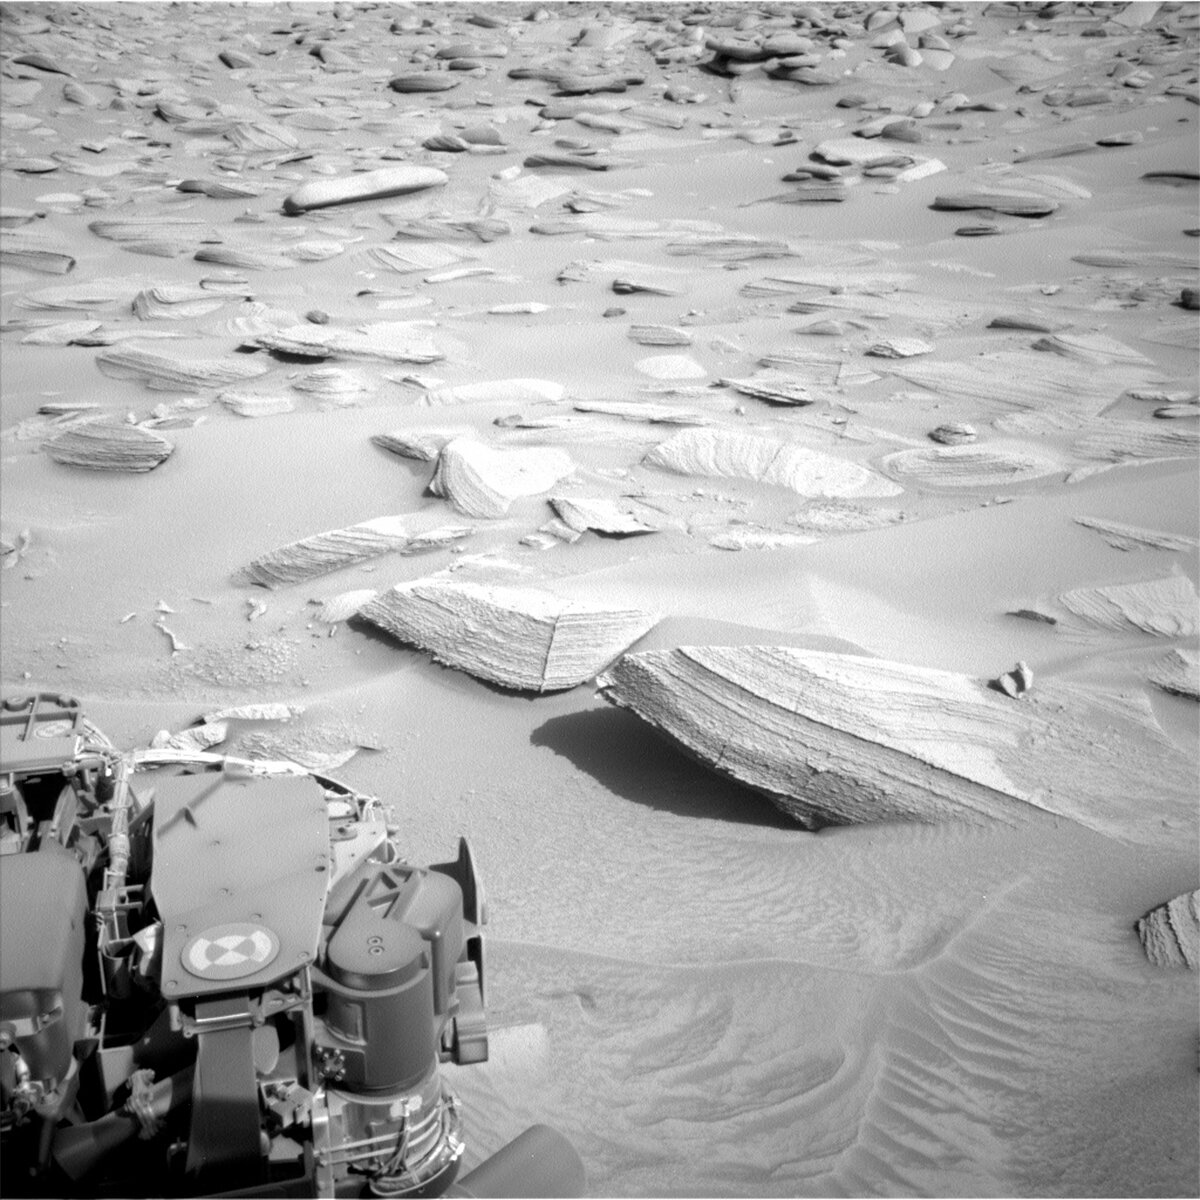 This image shows part of the Curiosity rover in the bottom left and rock formations on the Mars surface up ahead.